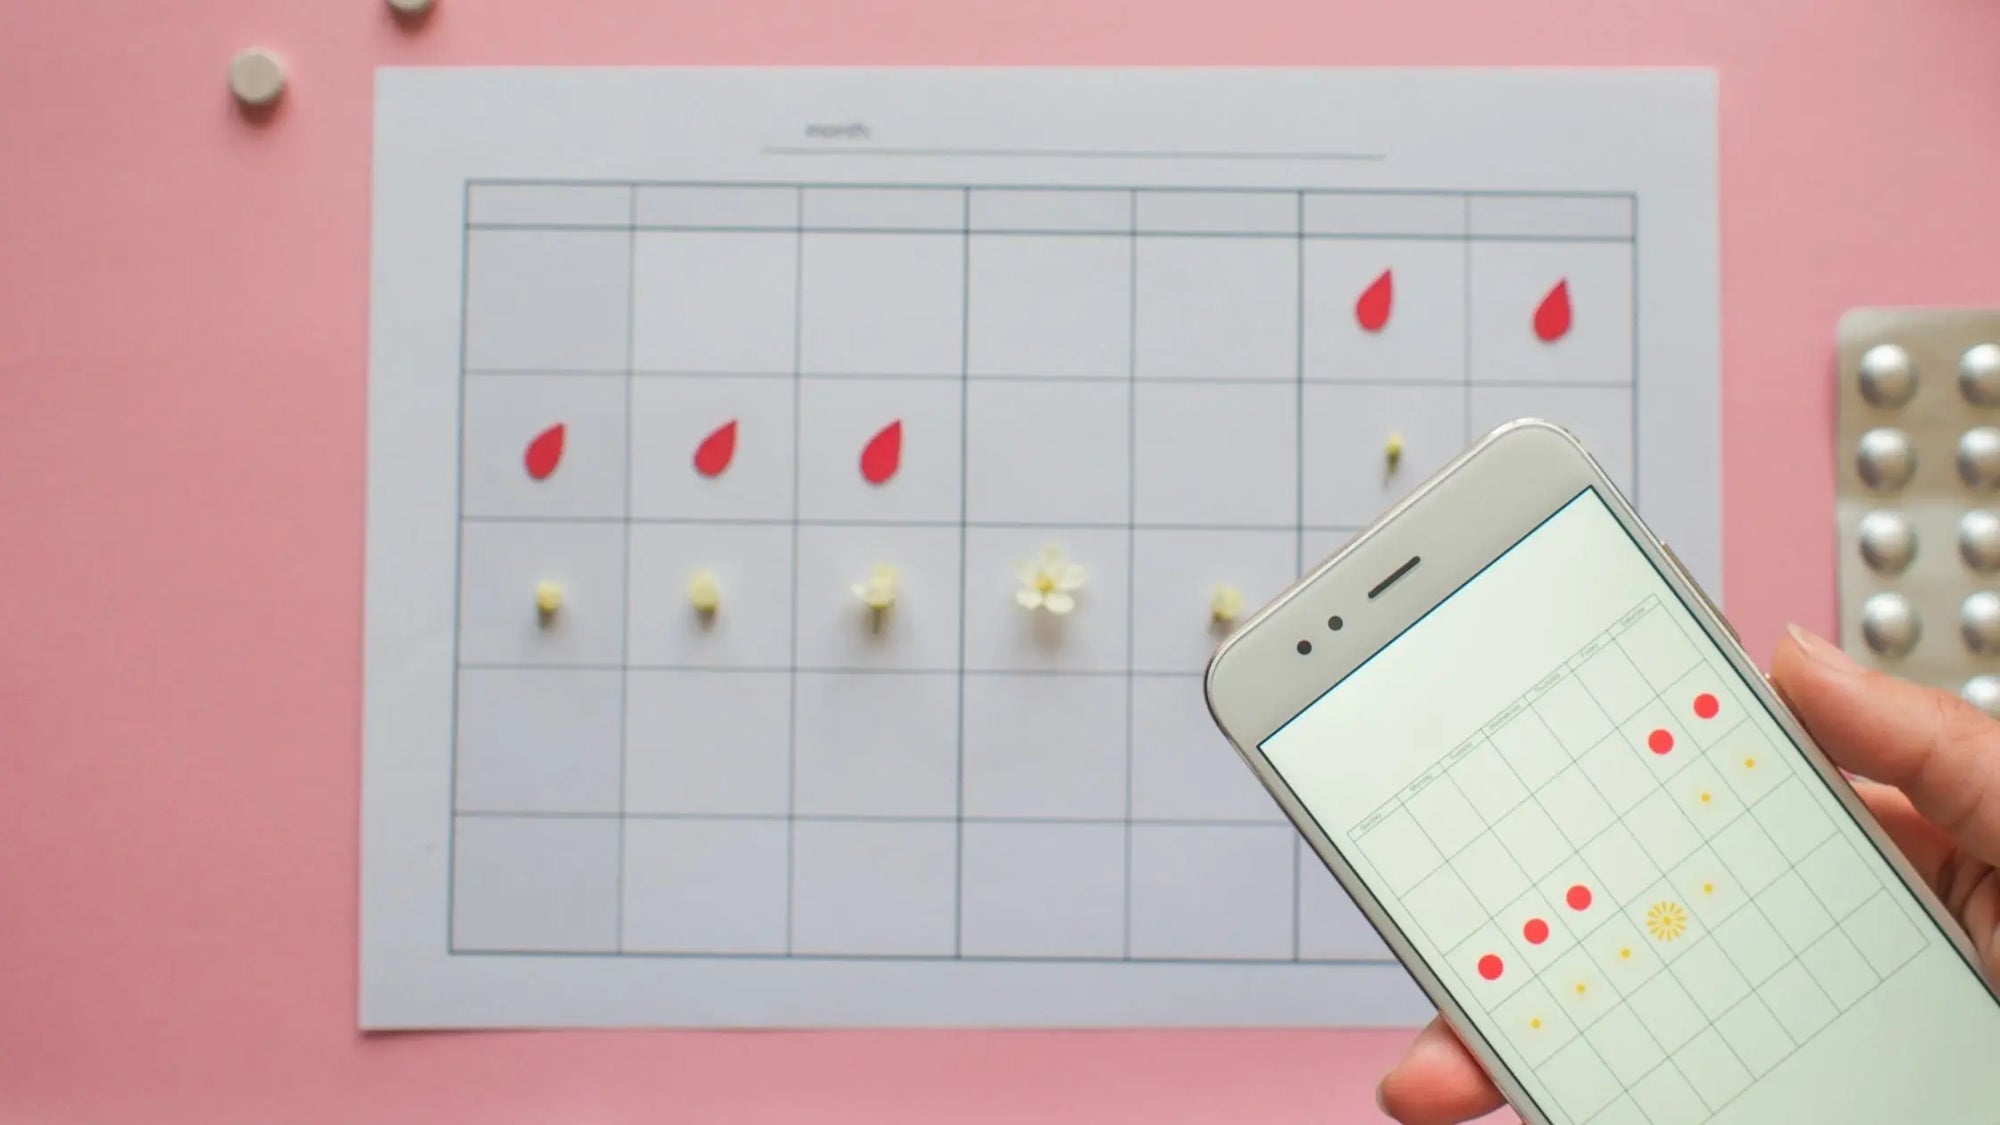 Comment calculer son cycle menstruel ? - BLOOMING